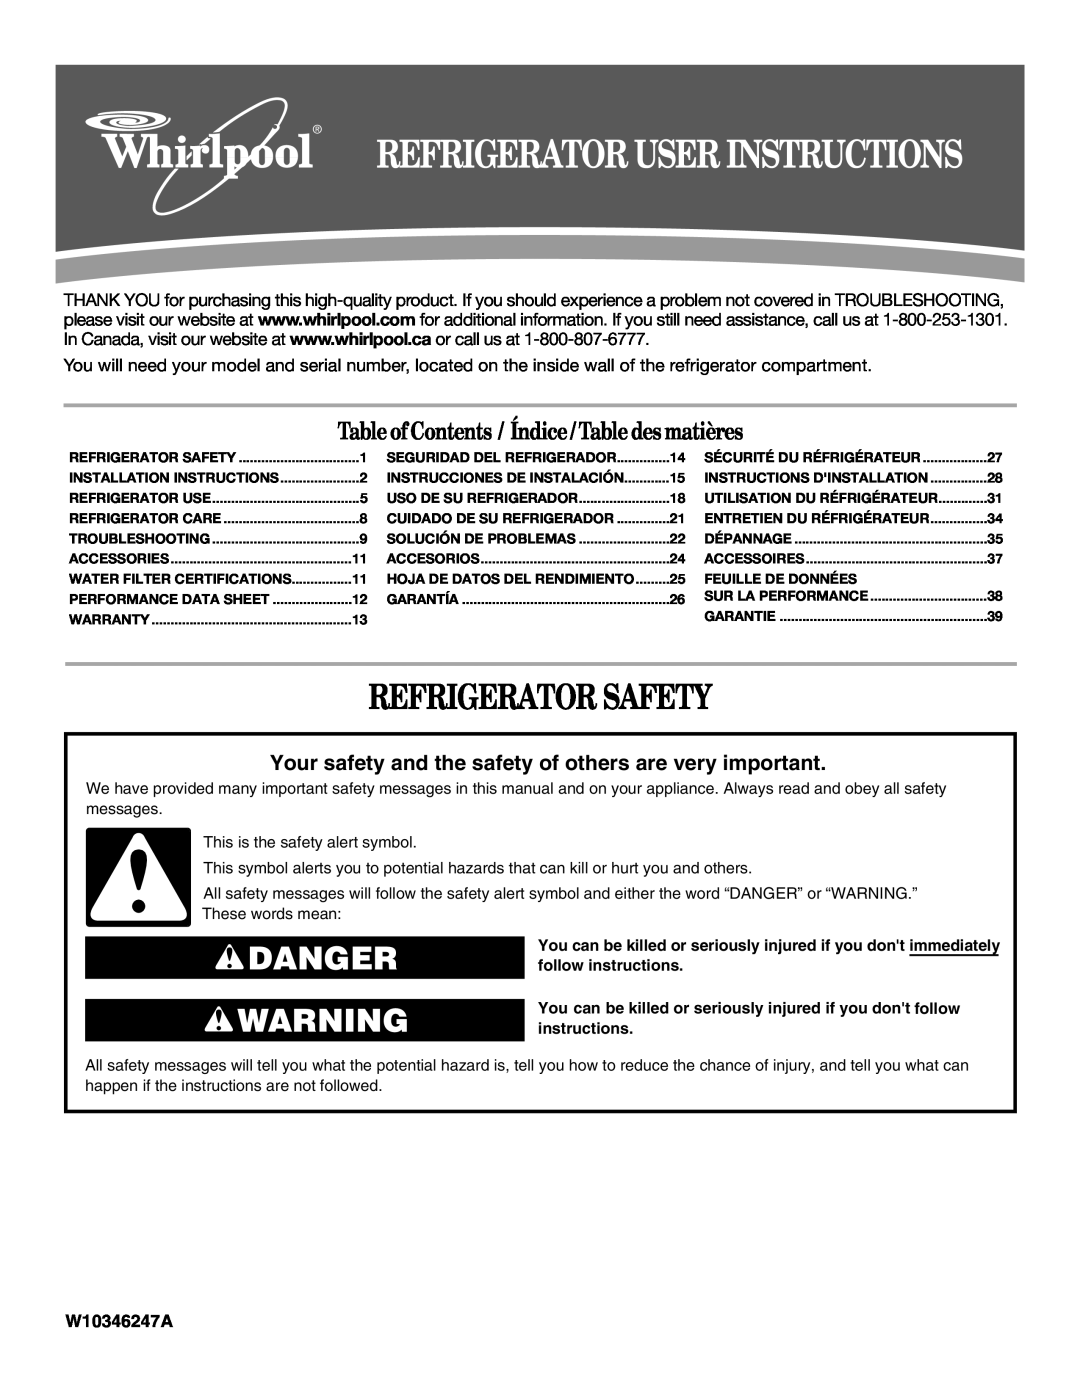 Whirlpool W10346247A installation instructions Refrigerator Safety, Danger, Table ofContents / Índice / Table des matières 